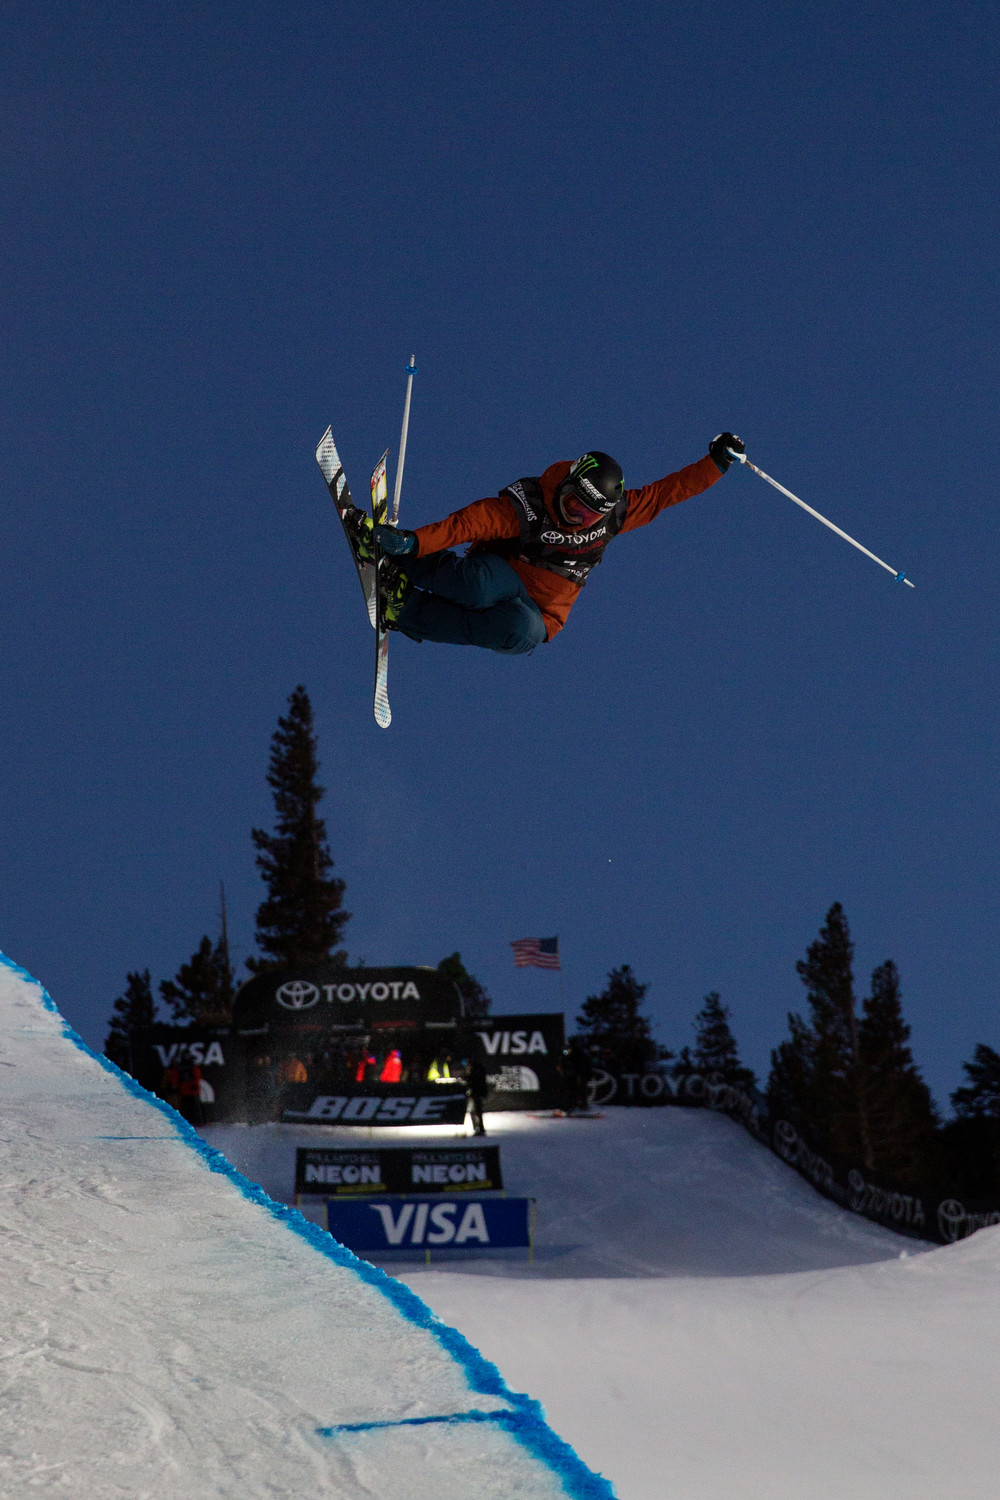 U.S. Olympic women’s slopestyle skier Devin Logan caught some air last month at the 2018 Mammoth Grand Prix in California. The Oceanside and Baldwin native is competing this week at the 2018 Winter Olympics.